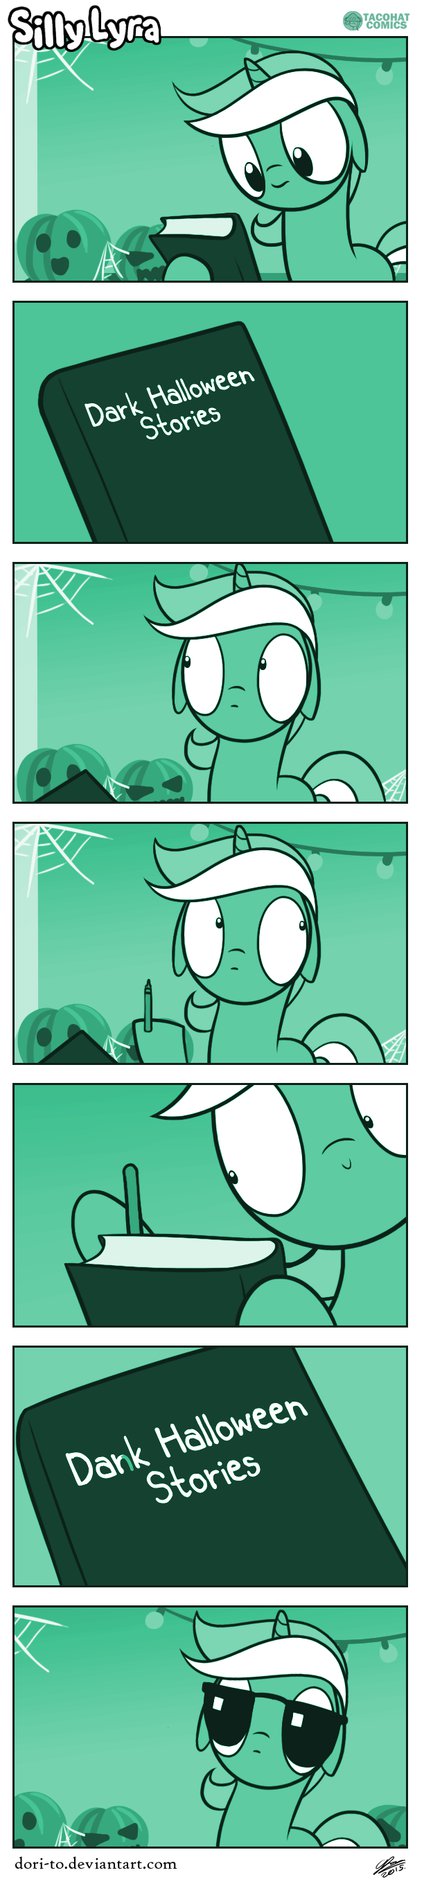 silly lyra   hello darkness by dori to-d